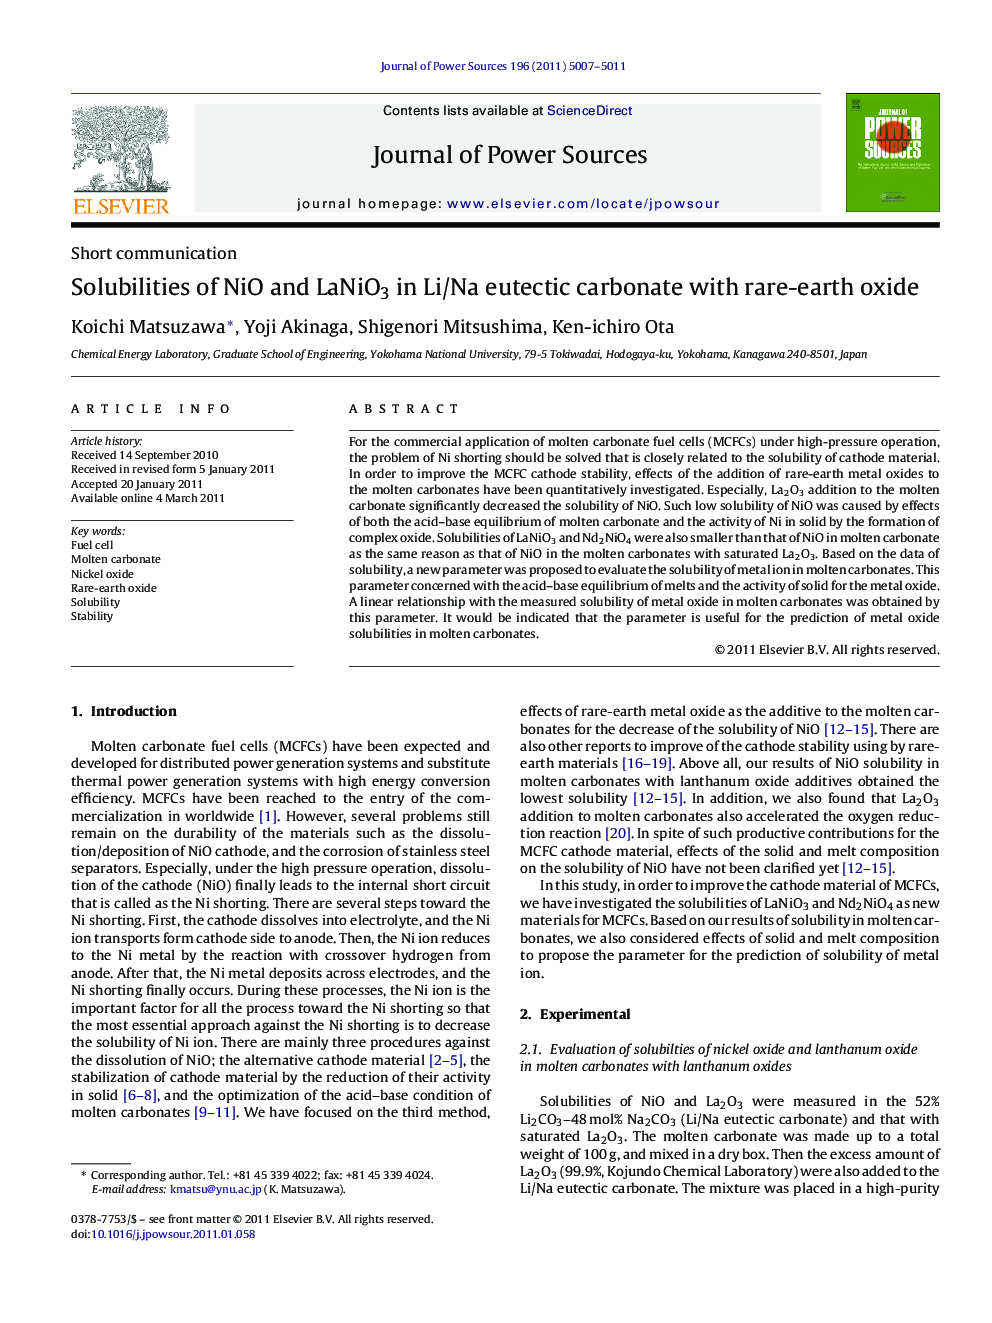 Solubilities of NiO and LaNiO3 in Li/Na eutectic carbonate with rare-earth oxide